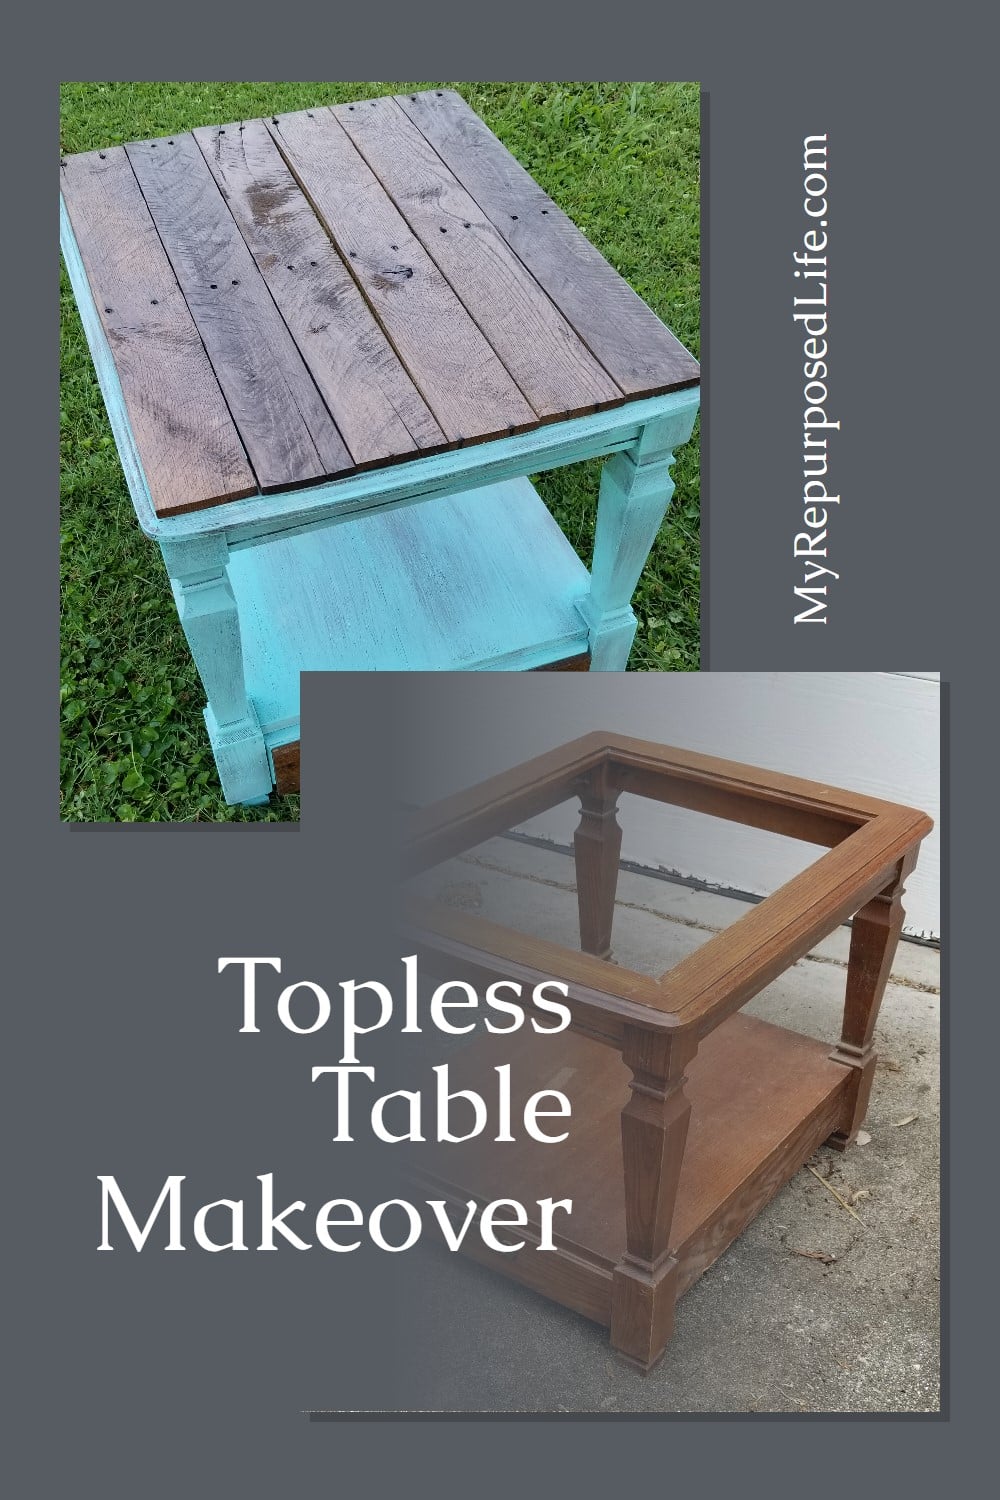 A roadkill rescue, this side table needed some cleaning, repairs and TLC. Reclaimed pallet boards make a new top for the formerly topless table. #MyRepurposedLife #roadkill #refabbed #furniture #makeover #rustic #table via @repurposedlife